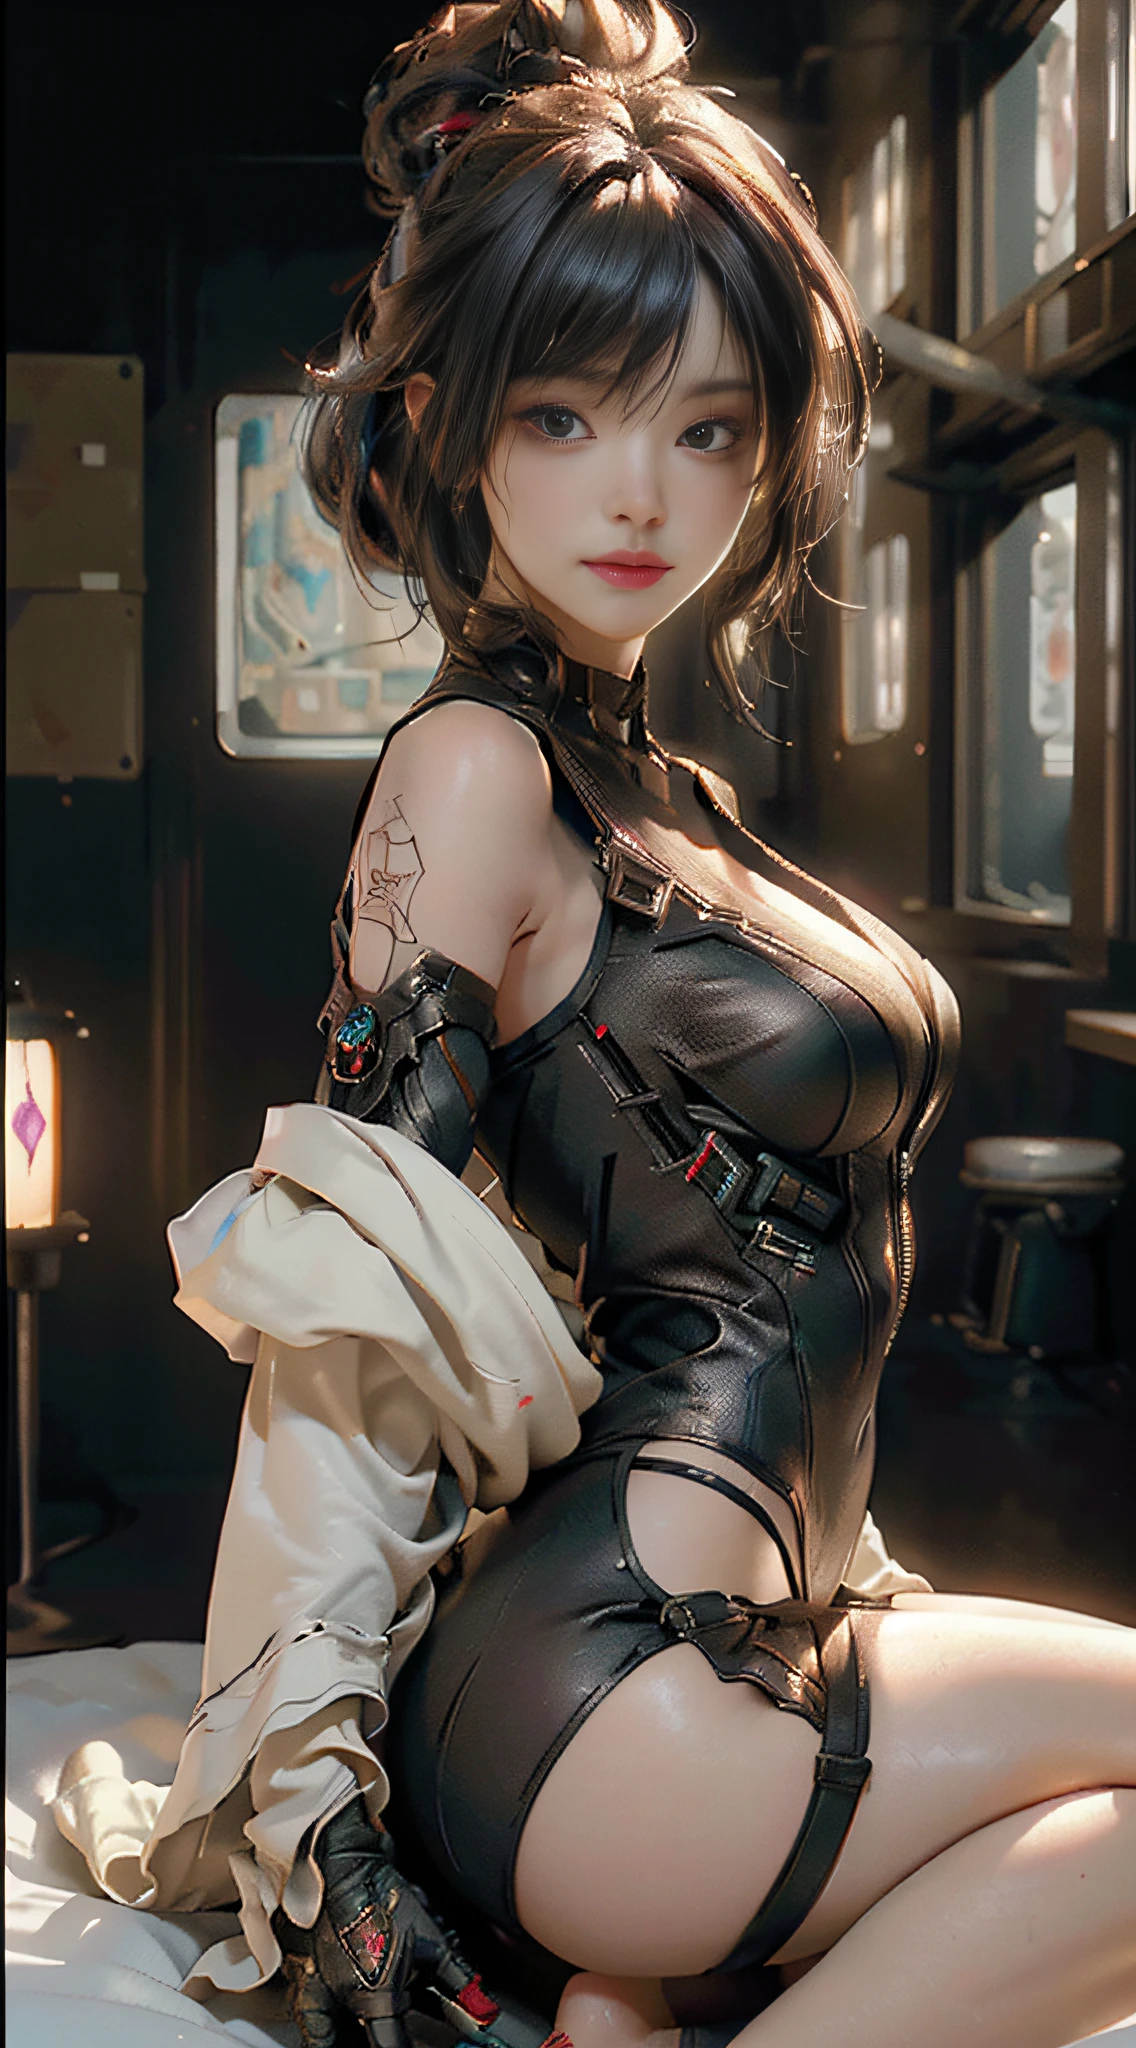 ((Best Quality)), ((Masterpiece)), (Detail: 1.4), 3D, A Beautiful Cyberpunk Female Figure, Big Breasts, Indoor Environment, Bed, HDR (High Dynamic Range), Ray Tracing, NVIDIA RTX, Super-Resolution, Unreal 5, Subsurface Scattering, PBR Textures, Post Processing, Anisotropic Filtering, Depth of Field, Maximum Sharpness and Sharpness, Multi-layered Textures, Albedo and Highlight Maps, Surface shading, Accurate simulation of light-material interactions, Perfect Proportions, Octane Render, Dichroic Light, Large Aperture, Low ISO, White Balance, Rule of Thirds, 8K RAW,